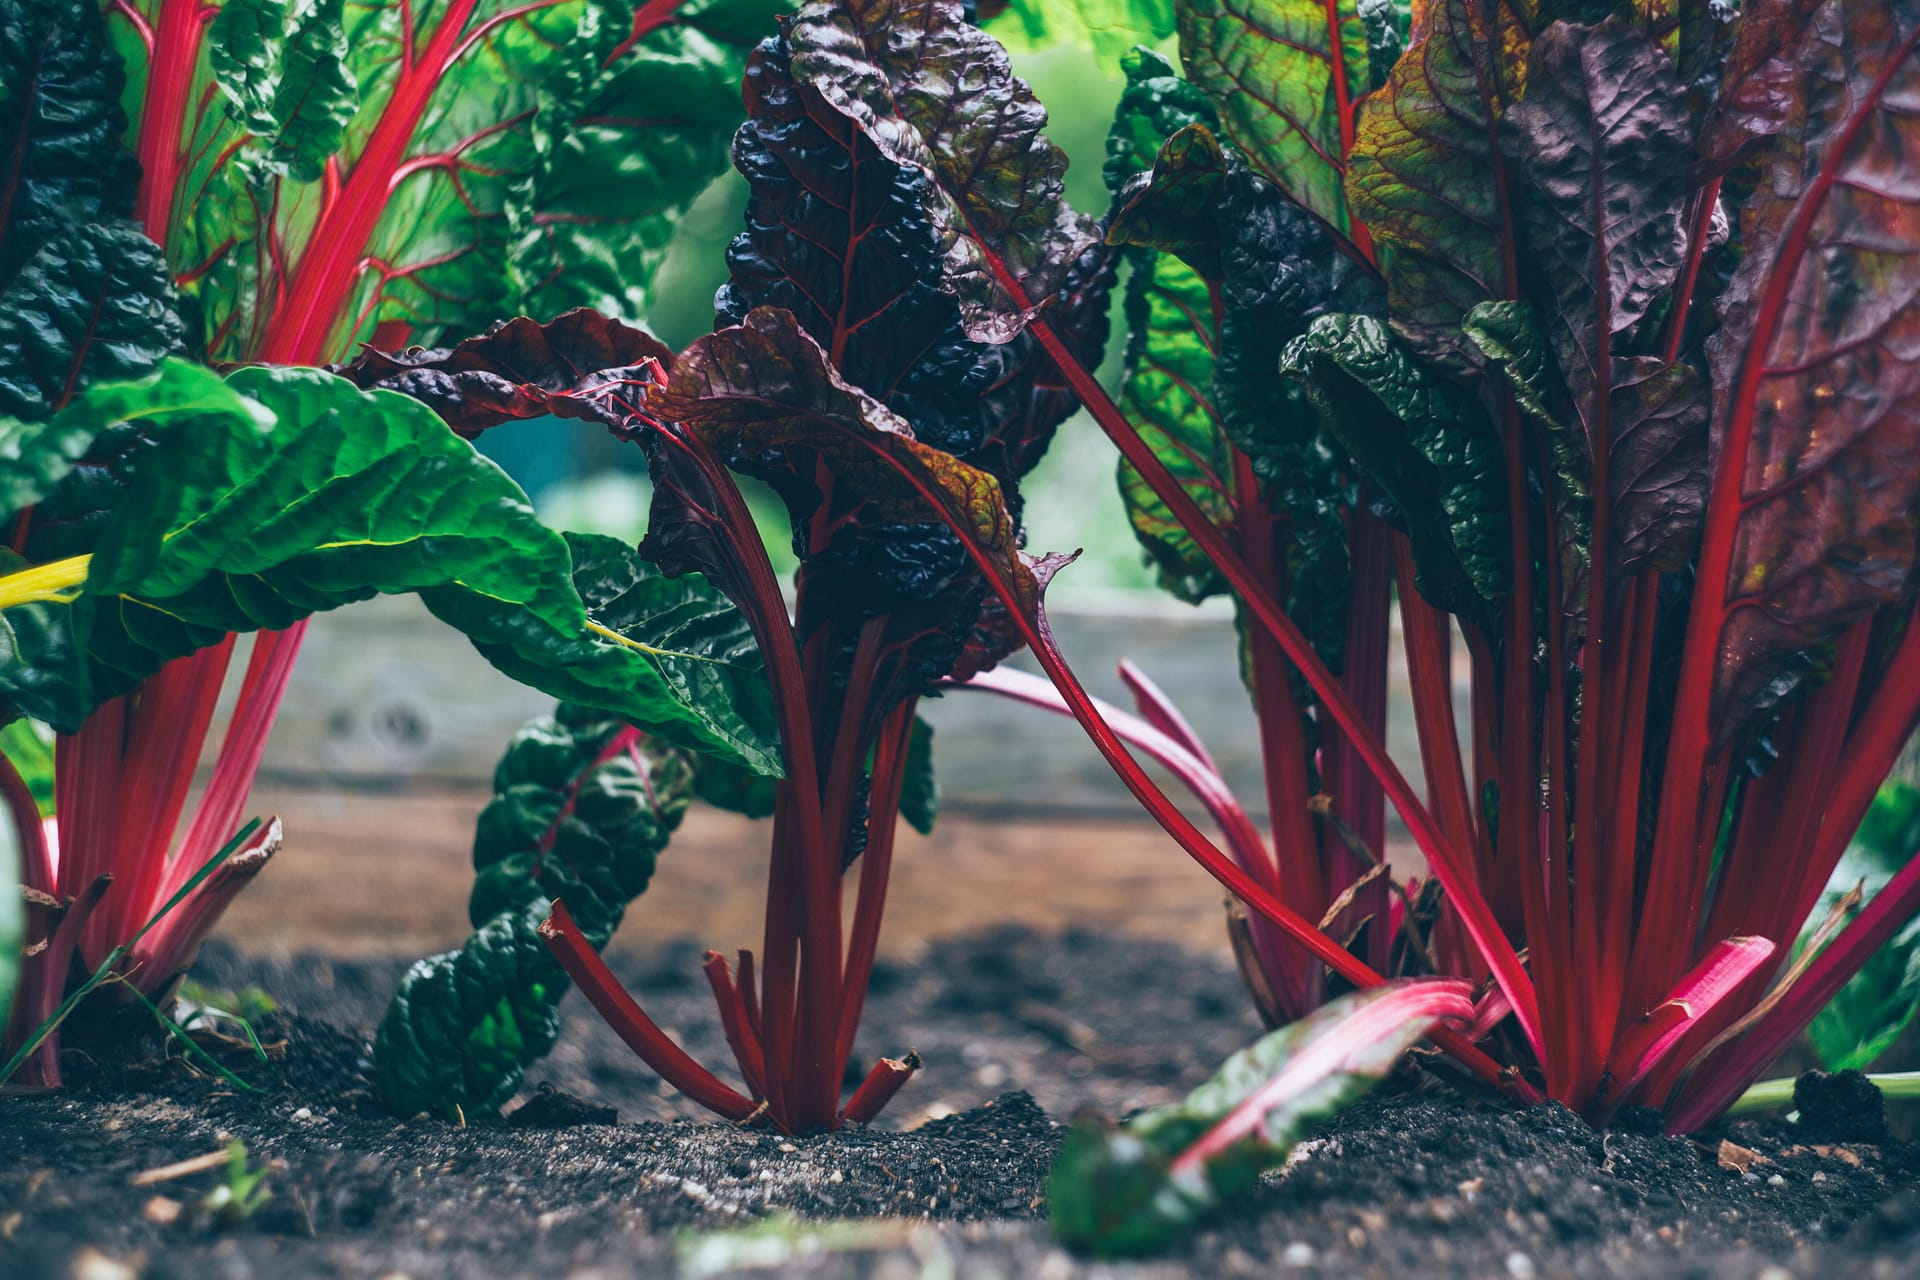 Edible Beet Greens growing out of the soil